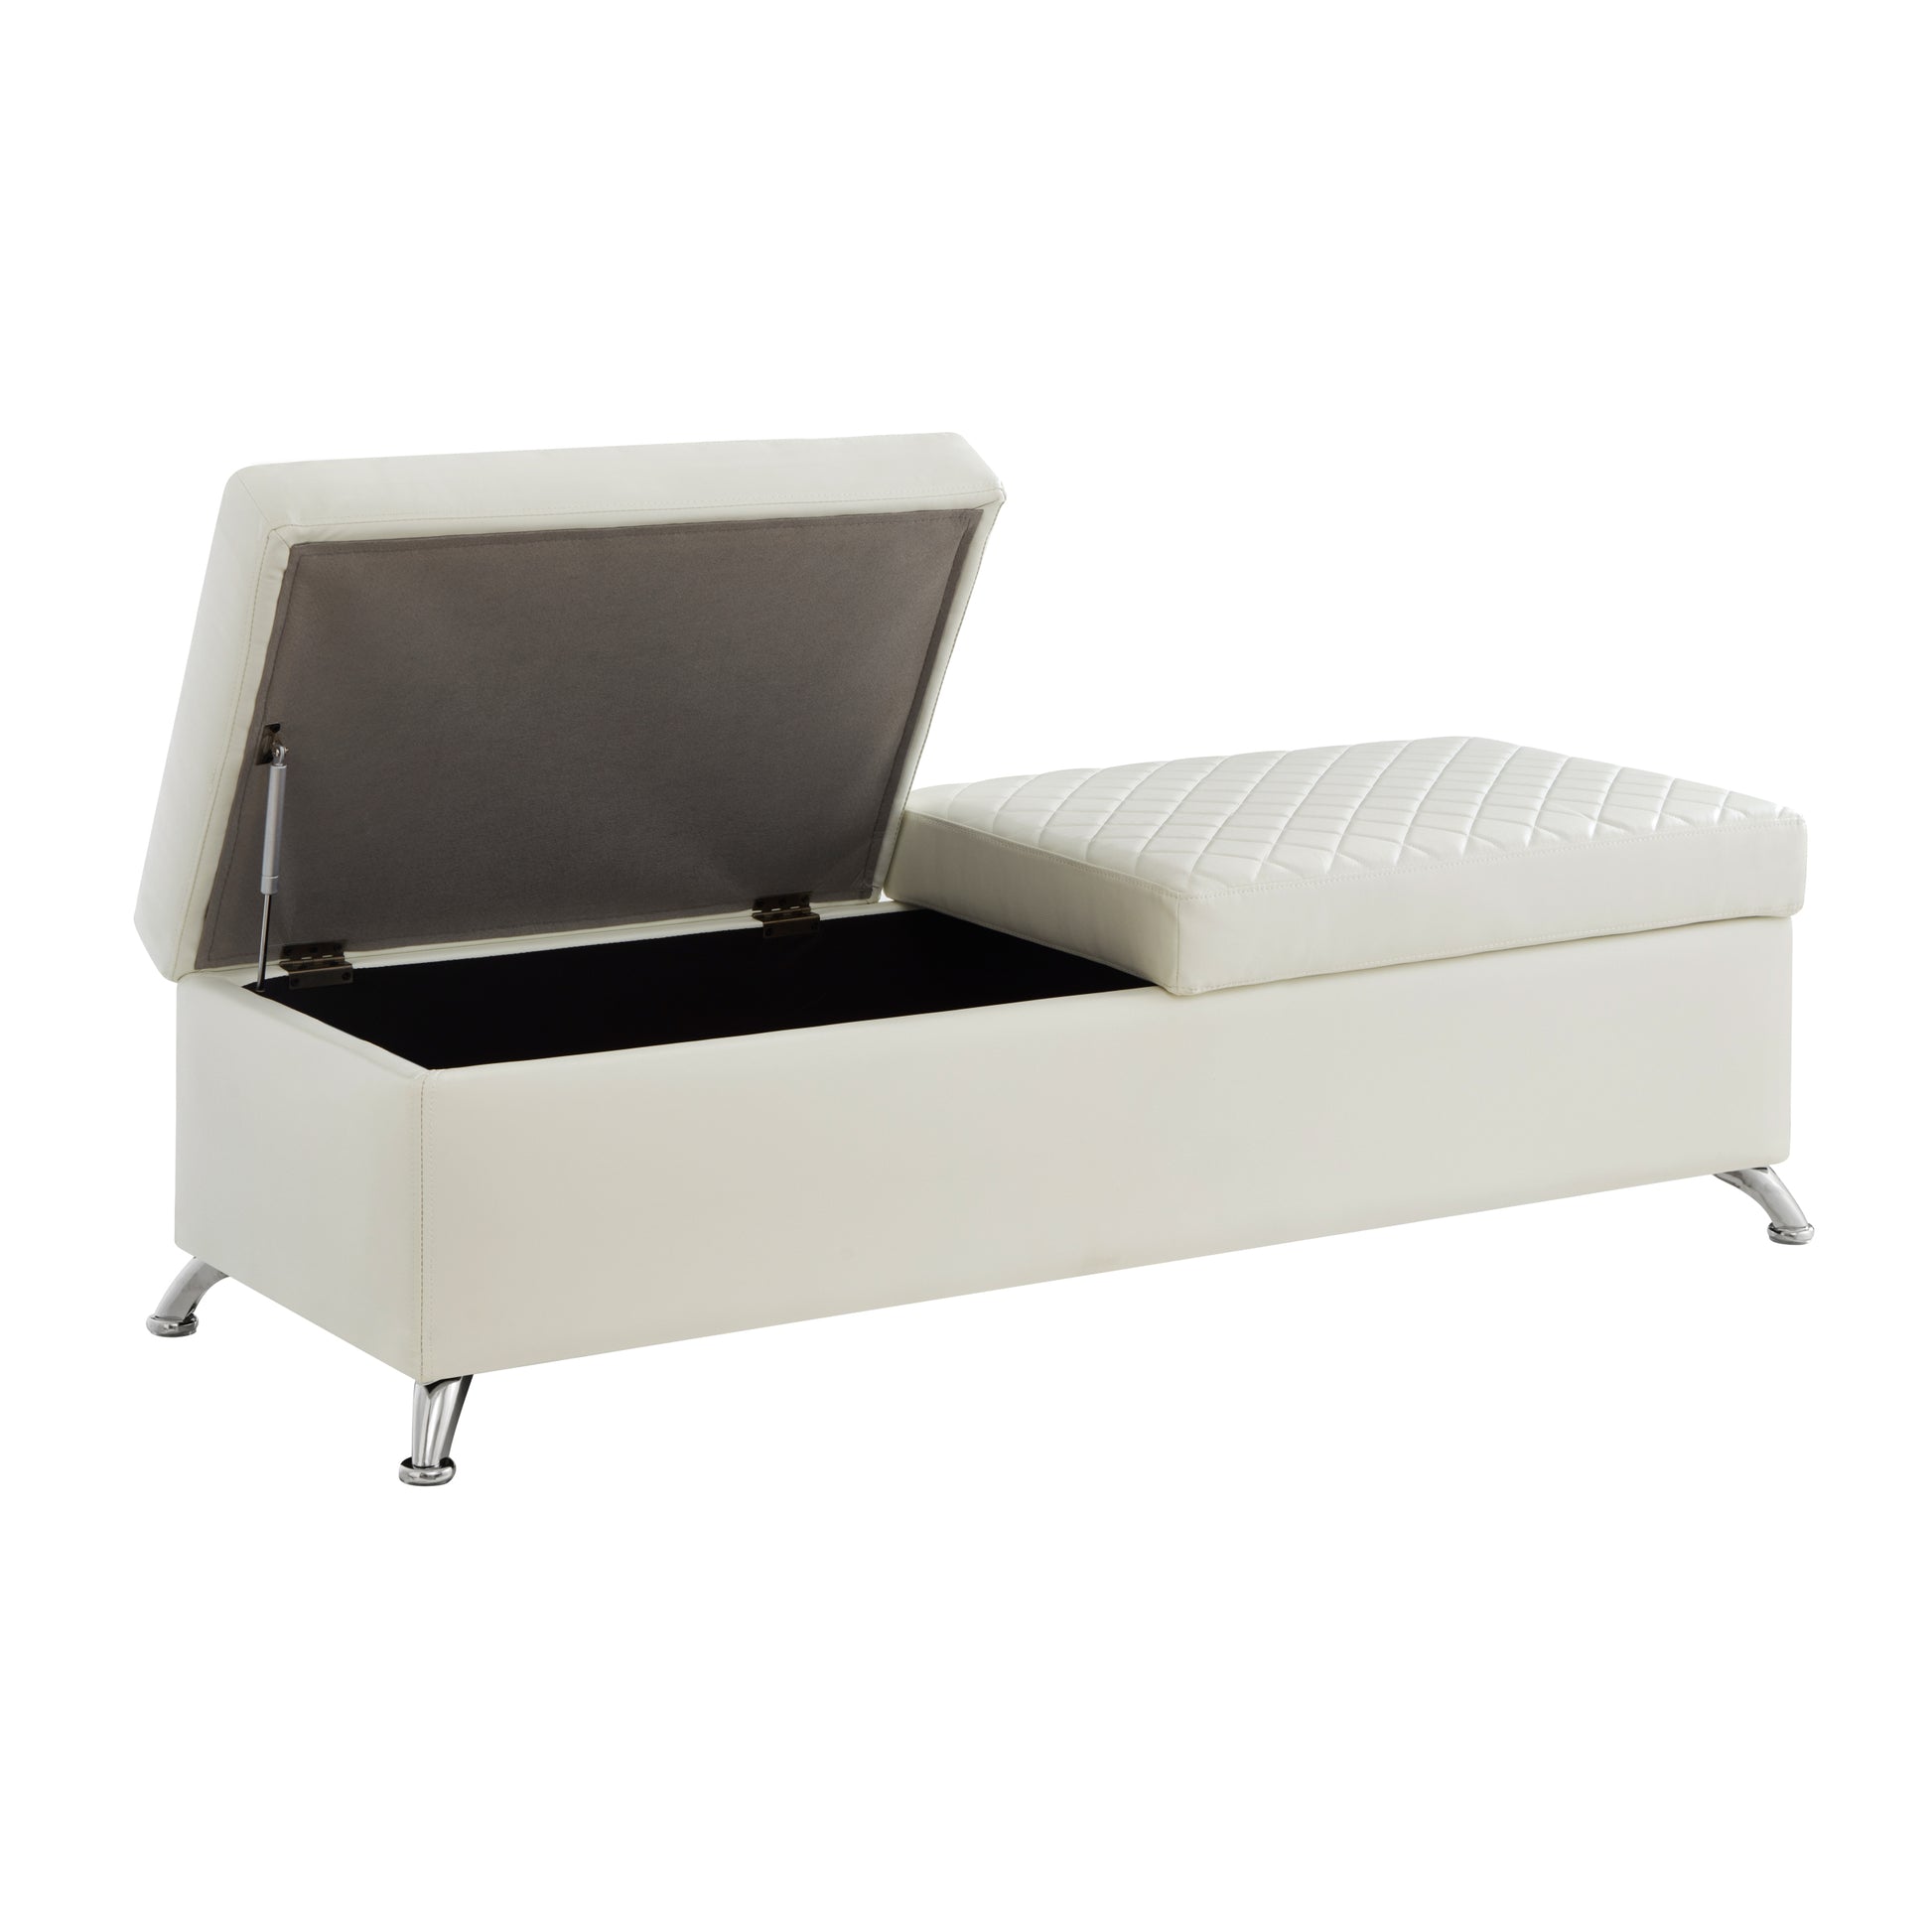 56.7" Bed Bench with Storage White Leather white-pu